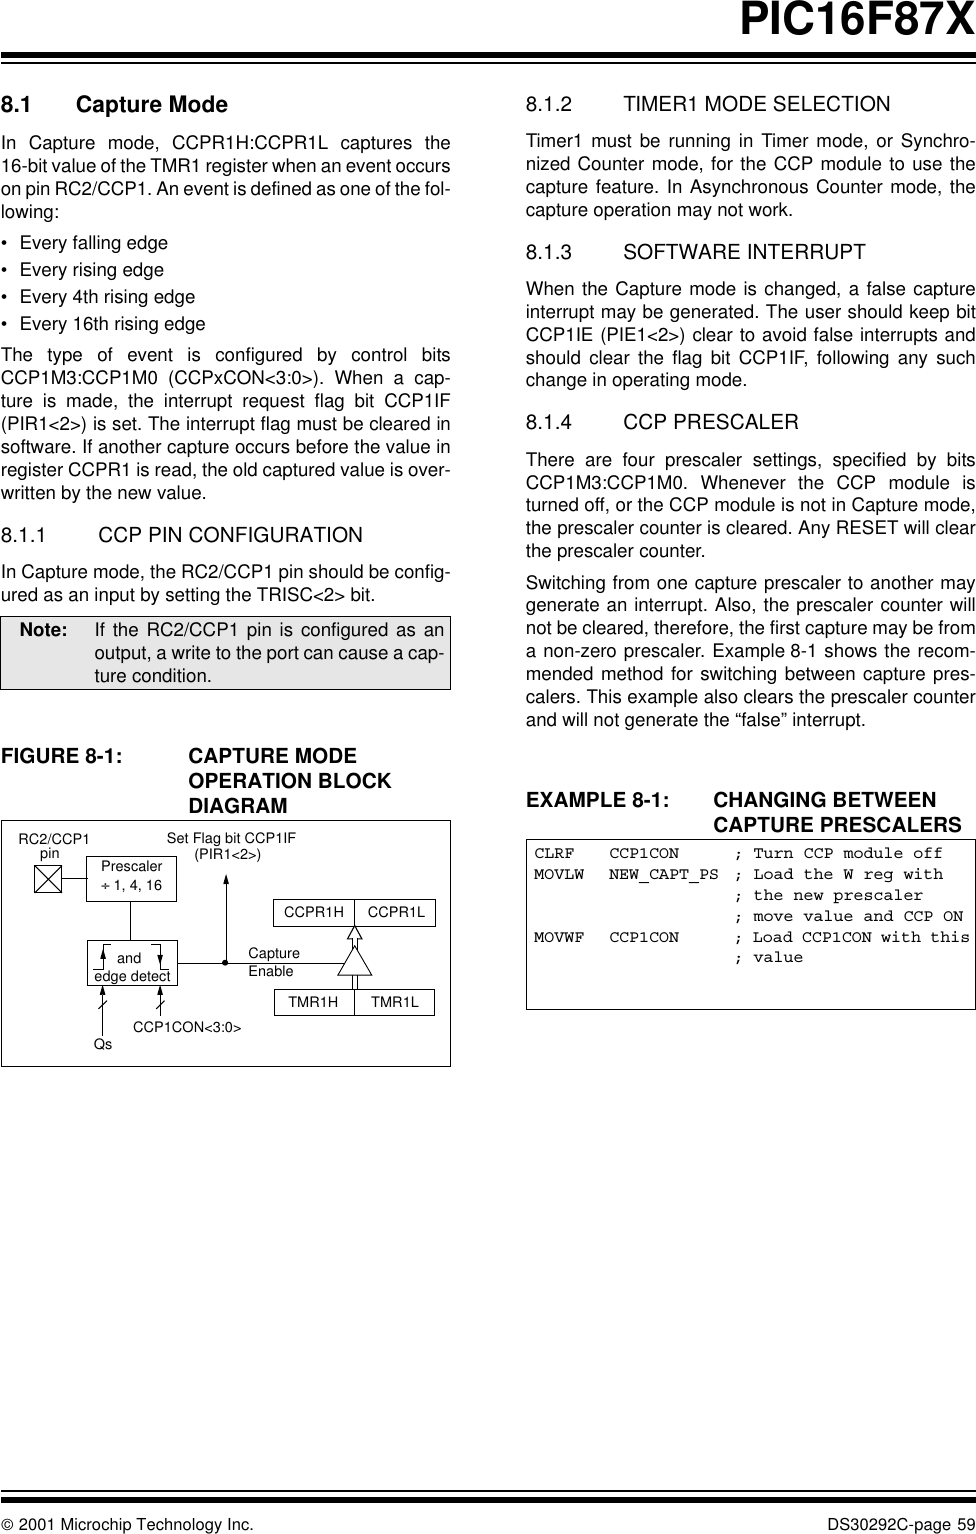  2001 Microchip Technology Inc. DS30292C-page 59PIC16F87X8.1 Capture ModeIn Capture mode, CCPR1H:CCPR1L captures the16-bit value of the TMR1 register when an event occurson pin RC2/CCP1. An event is defined as one of the fol-lowing:•Every falling edge•Every rising edge•Every 4th rising edge•Every 16th rising edgeThe type of event is configured by control bitsCCP1M3:CCP1M0 (CCPxCON&lt;3:0&gt;). When a cap-ture is made, the interrupt request flag bit CCP1IF(PIR1&lt;2&gt;) is set. The interrupt flag must be cleared insoftware. If another capture occurs before the value inregister CCPR1 is read, the old captured value is over-written by the new value.8.1.1 CCP PIN CONFIGURATIONIn Capture mode, the RC2/CCP1 pin should be config-ured as an input by setting the TRISC&lt;2&gt; bit.FIGURE 8-1: CAPTURE MODE OPERATION BLOCK DIAGRAM8.1.2 TIMER1 MODE SELECTIONTimer1 must be running in Timer mode, or Synchro-nized Counter mode, for the CCP module to use thecapture feature. In Asynchronous Counter mode, thecapture operation may not work. 8.1.3 SOFTWARE INTERRUPTWhen the Capture mode is changed, a false captureinterrupt may be generated. The user should keep bitCCP1IE (PIE1&lt;2&gt;) clear to avoid false interrupts andshould clear the flag bit CCP1IF, following any suchchange in operating mode.8.1.4 CCP PRESCALERThere are four prescaler settings, specified by bitsCCP1M3:CCP1M0. Whenever the CCP module isturned off, or the CCP module is not in Capture mode,the prescaler counter is cleared. Any RESET will clearthe prescaler counter.Switching from one capture prescaler to another maygenerate an interrupt. Also, the prescaler counter willnot be cleared, therefore, the first capture may be froma non-zero prescaler. Example 8-1 shows the recom-mended method for switching between capture pres-calers. This example also clears the prescaler counterand will not generate the “false” interrupt.EXAMPLE 8-1: CHANGING BETWEEN CAPTURE PRESCALERSNote: If the RC2/CCP1 pin is configured as anoutput, a write to the port can cause a cap-ture condition. CCPR1H CCPR1LTMR1H TMR1LSet Flag bit CCP1IF(PIR1&lt;2&gt;)CaptureEnableQs CCP1CON&lt;3:0&gt;RC2/CCP1Prescaler÷ 1, 4, 16andedge detectpin CLRF CCP1CON ; Turn CCP module offMOVLW NEW_CAPT_PS ; Load the W reg with; the new prescaler; move value and CCP ONMOVWF CCP1CON ; Load CCP1CON with this; value